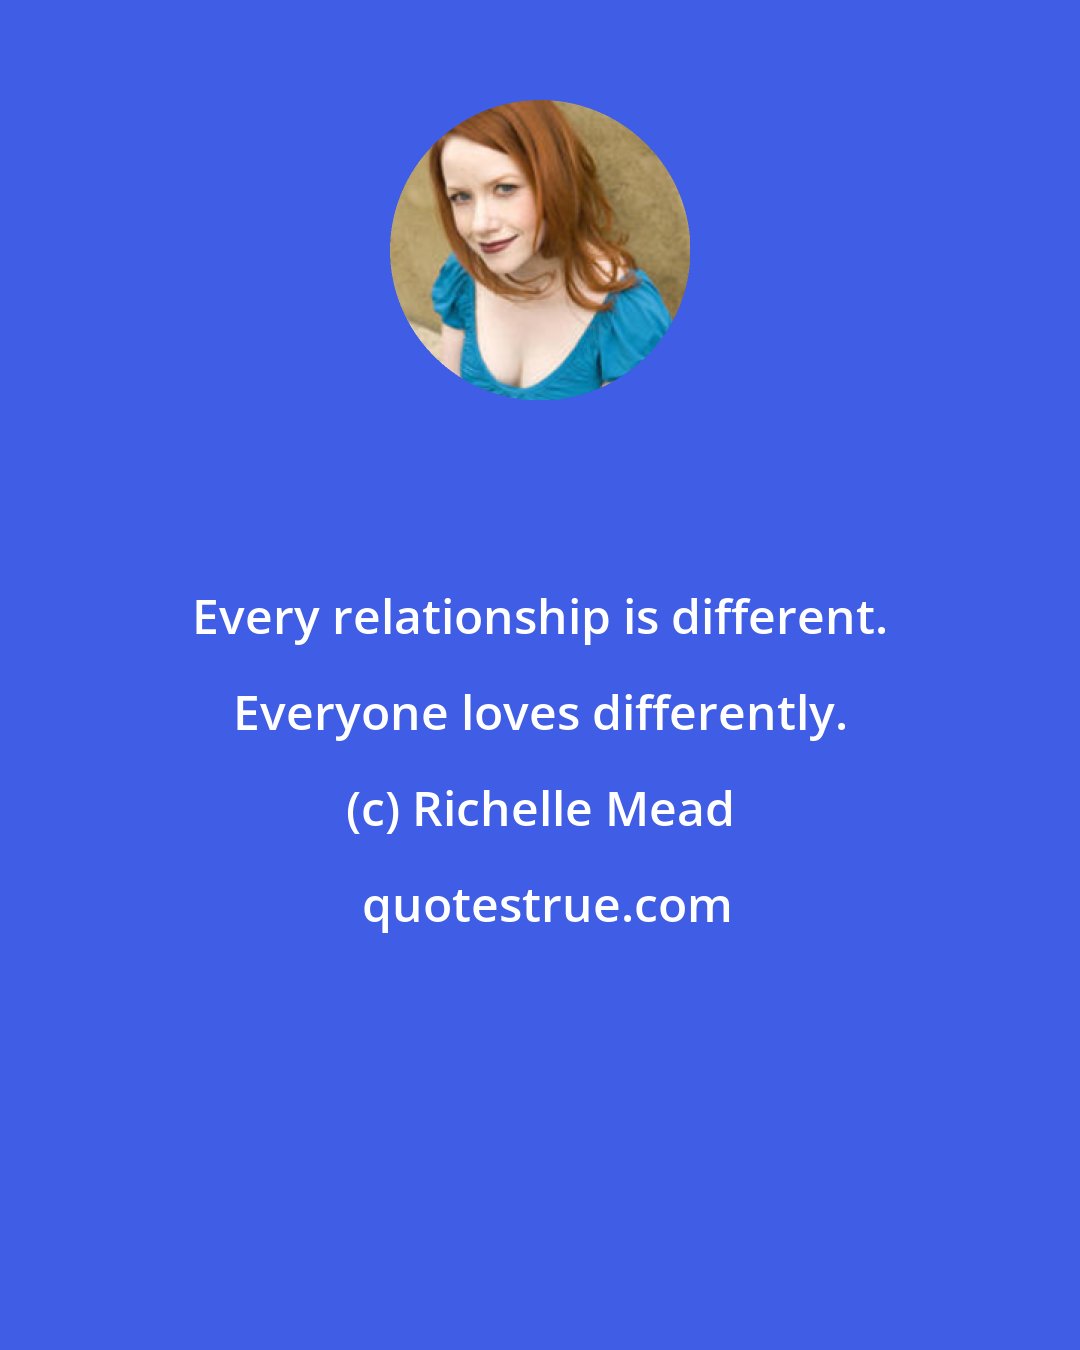 Richelle Mead: Every relationship is different. Everyone loves differently.